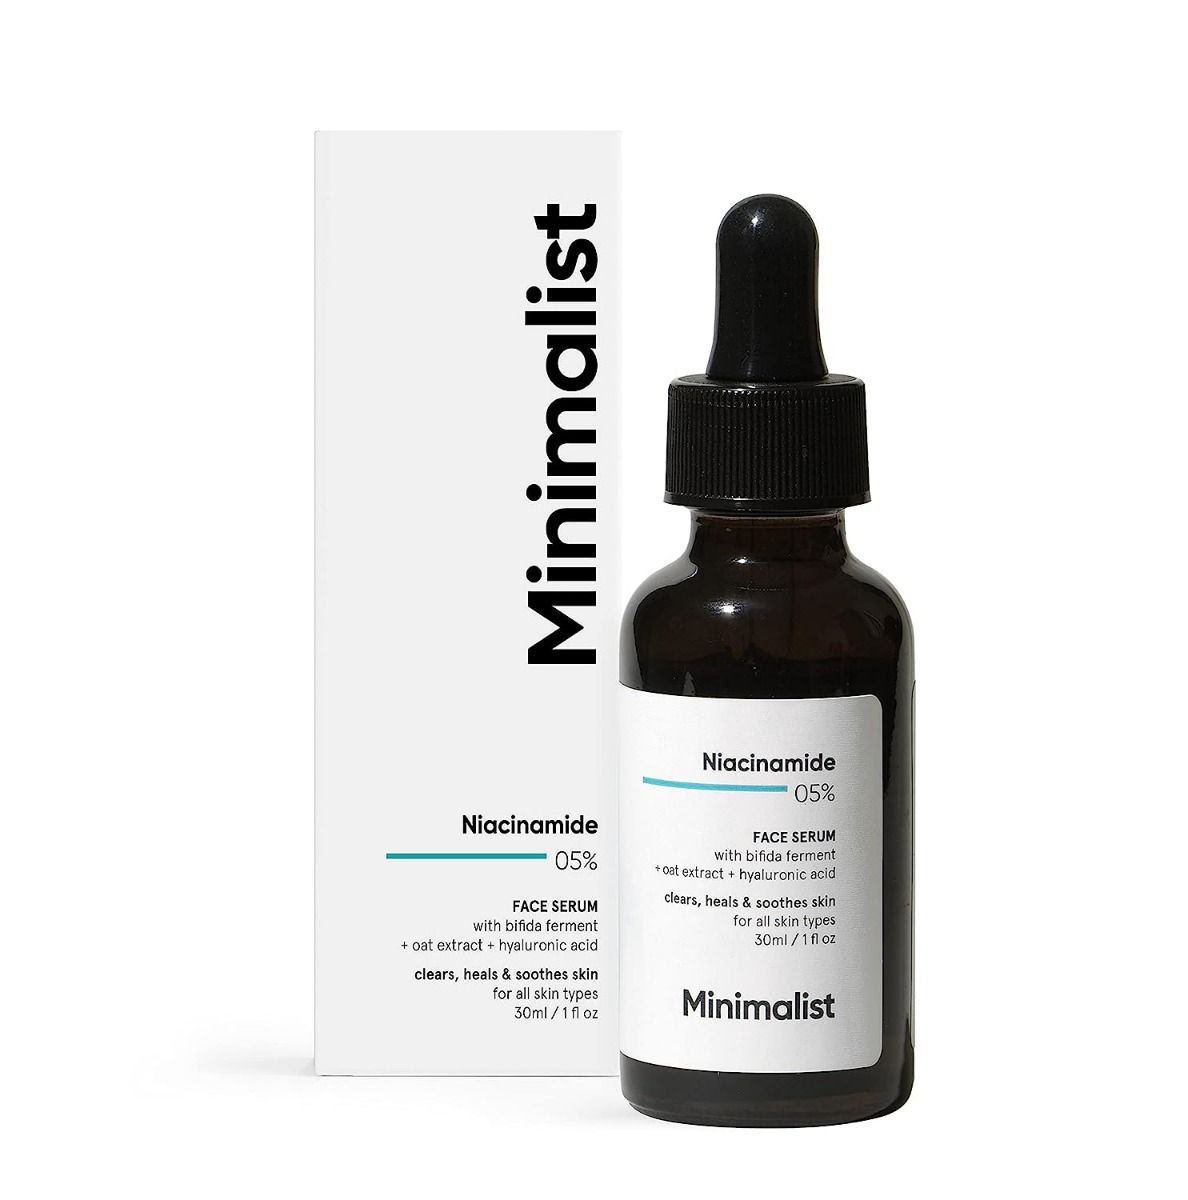 Buy Minimalist 05% Niacinamide Face Serum | Reduces Dullness and Acne Spots | 30 ml Online